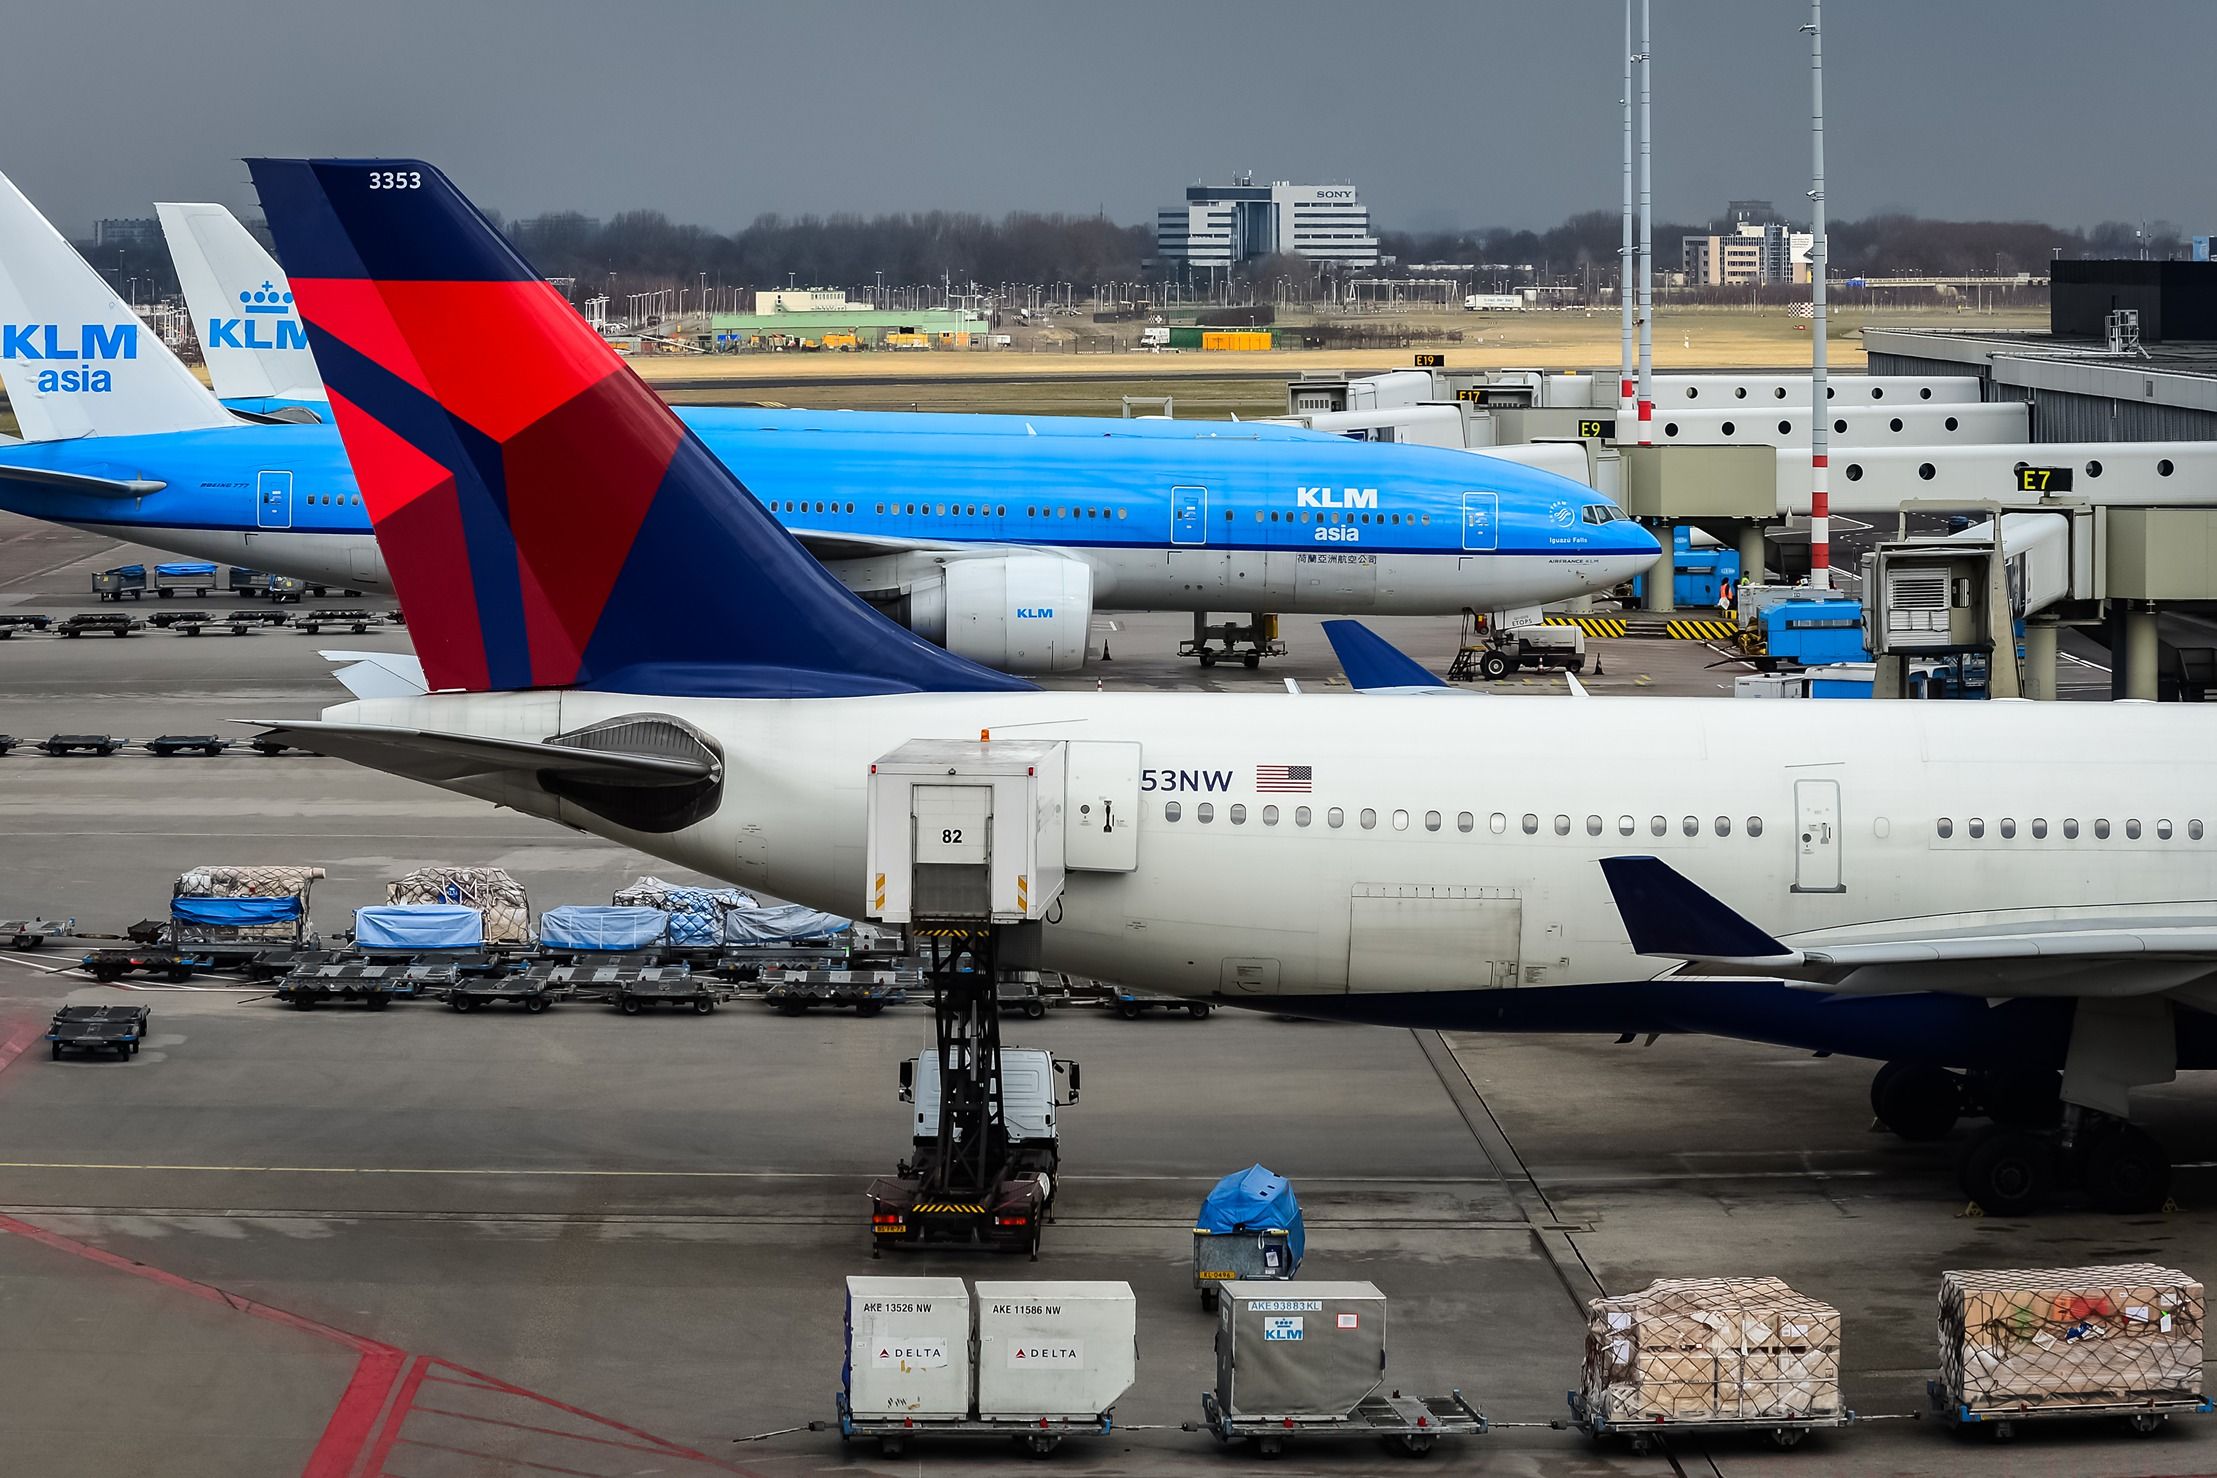 KLM and Delta aircraft parked on the tarmac at Amsterdam Airport Schiphol.